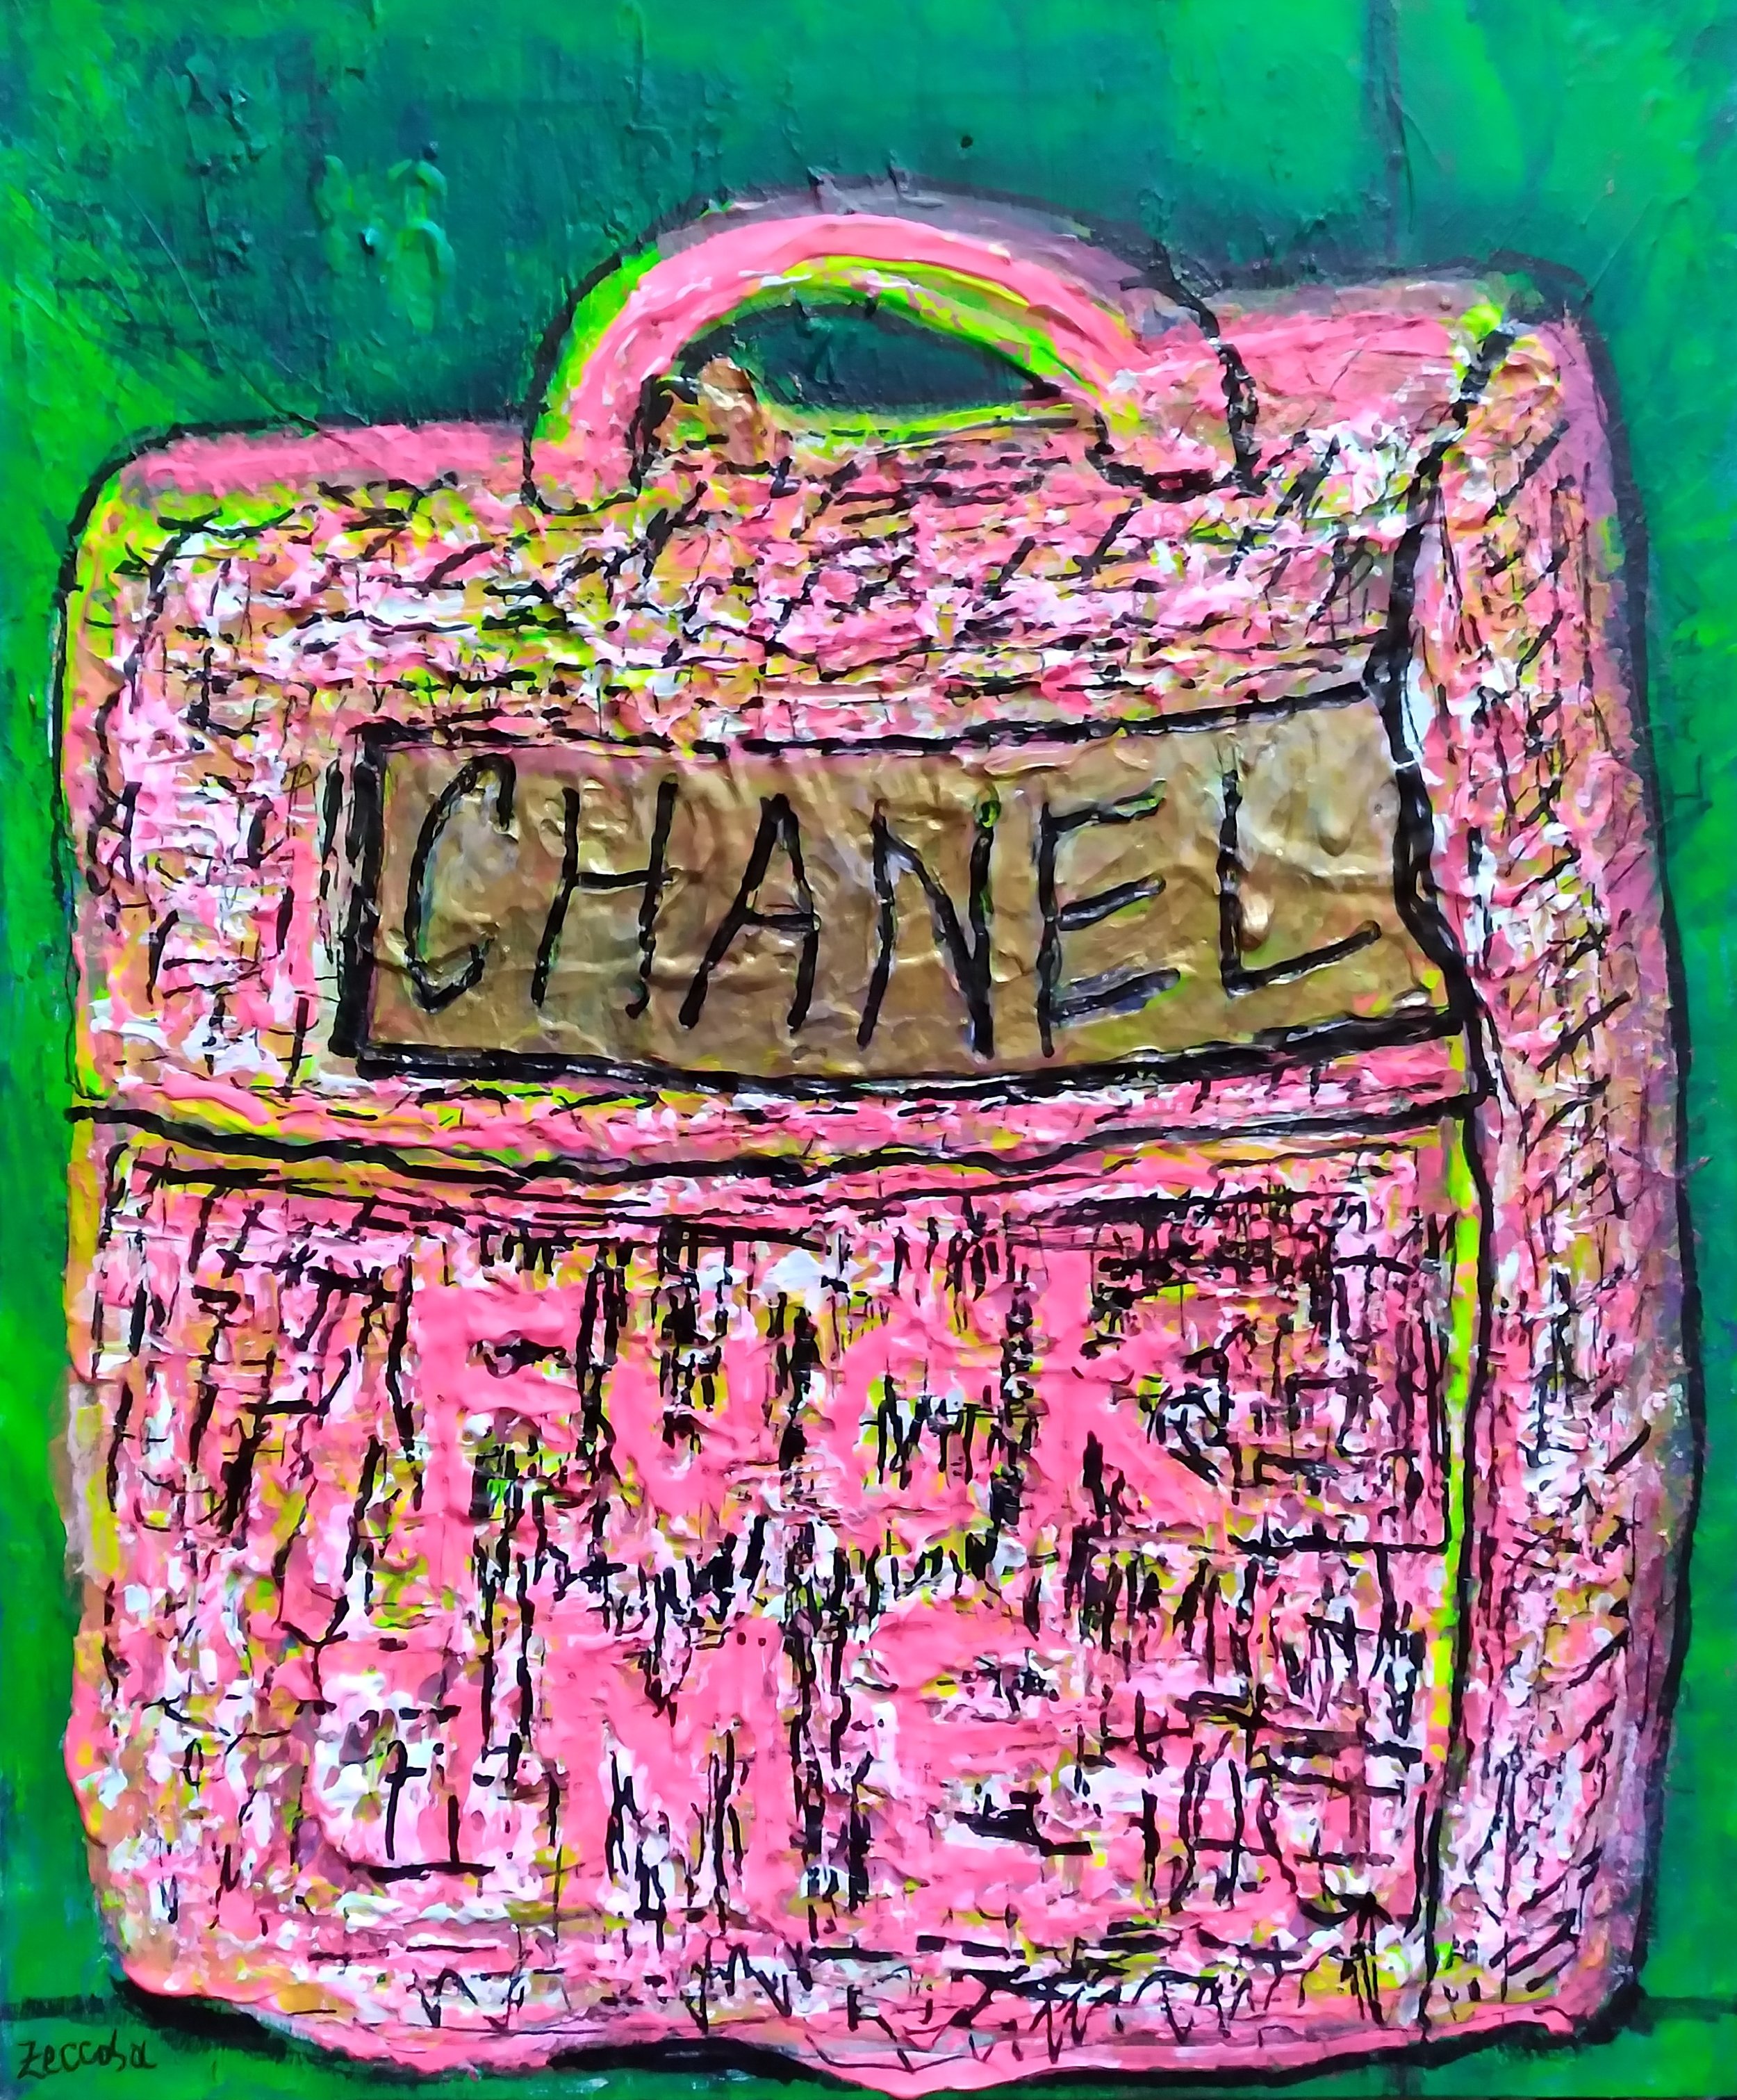 Her Pink Purse, 2009. Oil, acrylic on canvas. 20” x 24”.